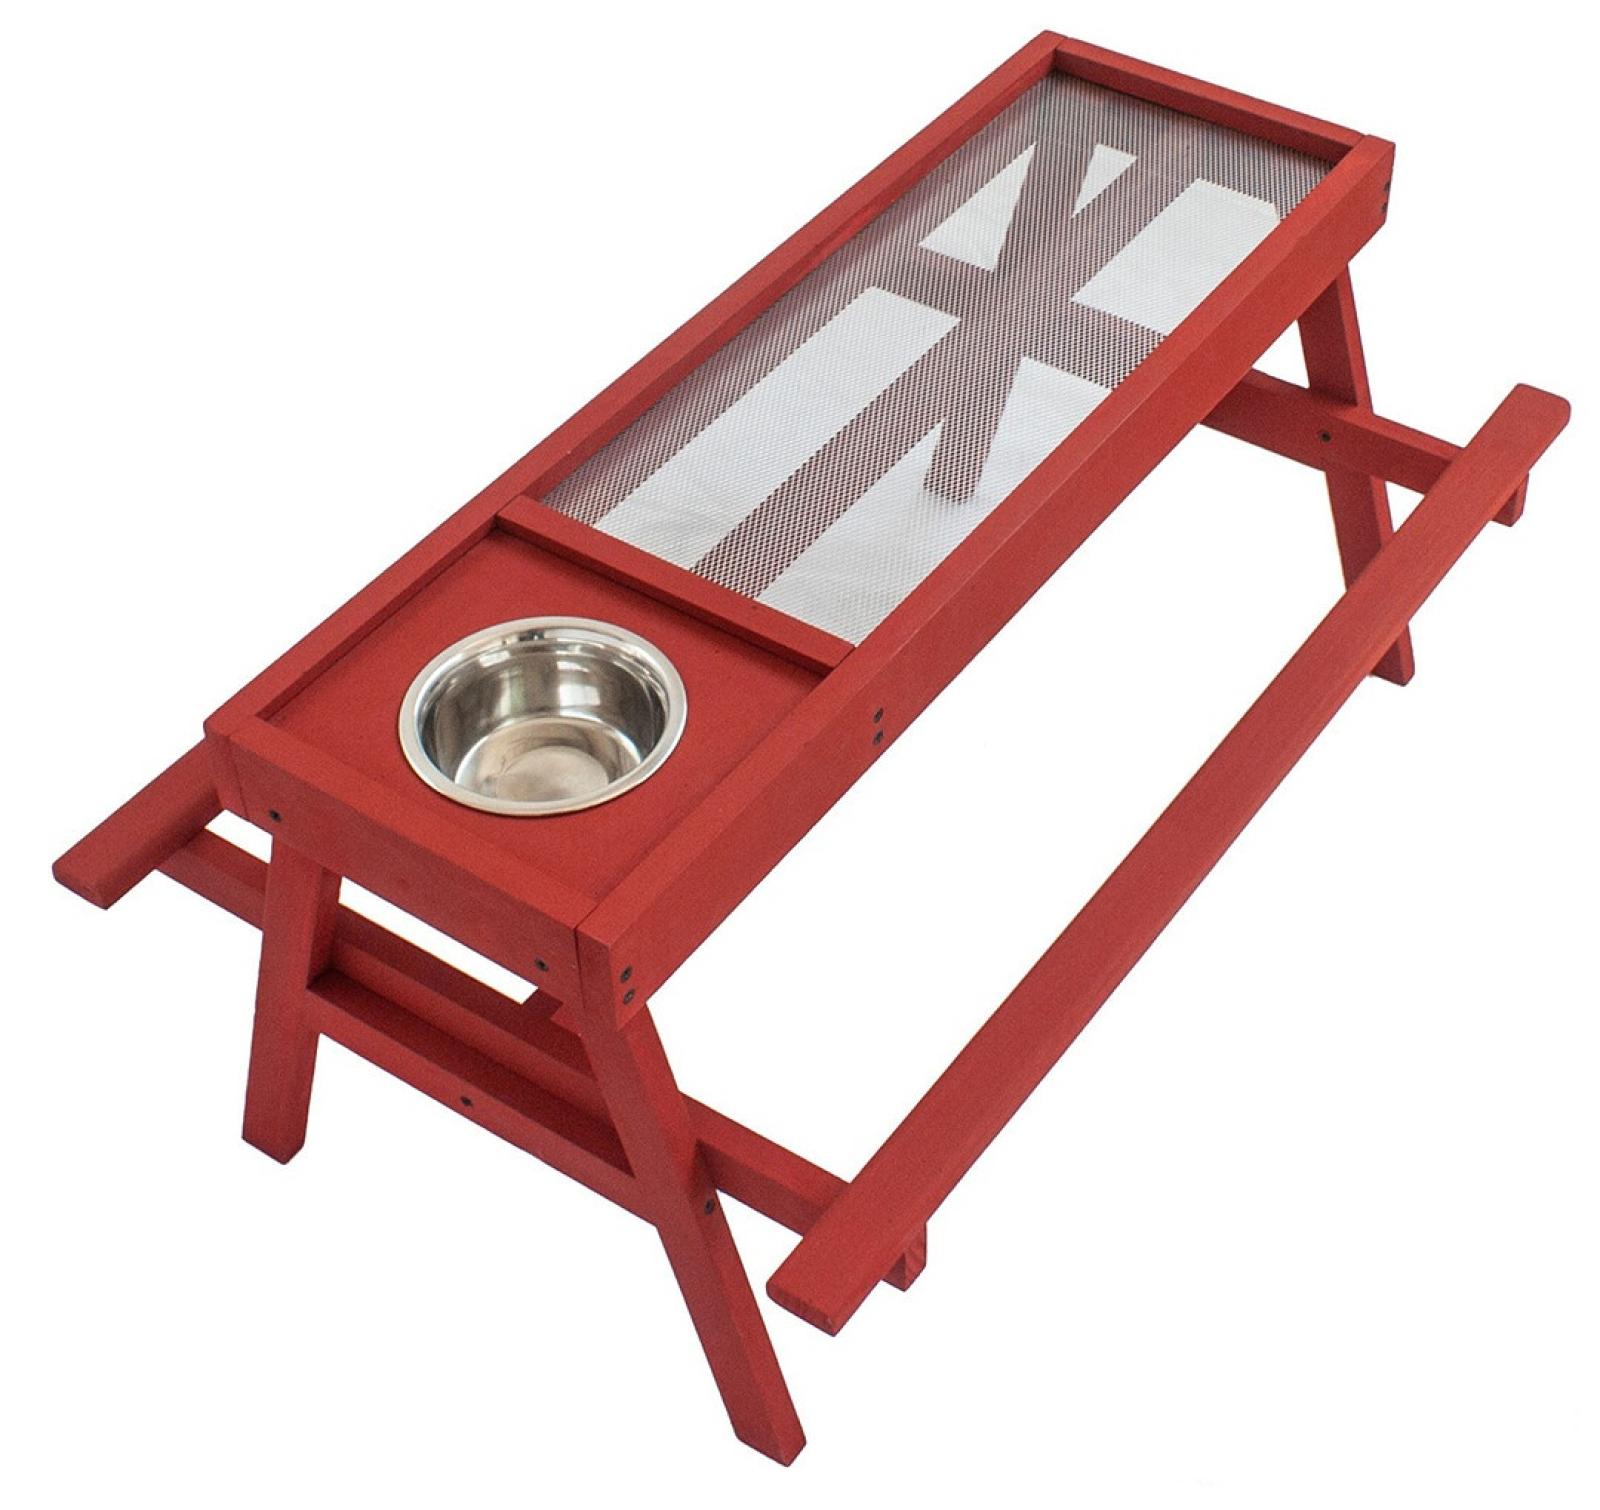 Coops & Feathers Chick-Nic Table Poultry Feeder